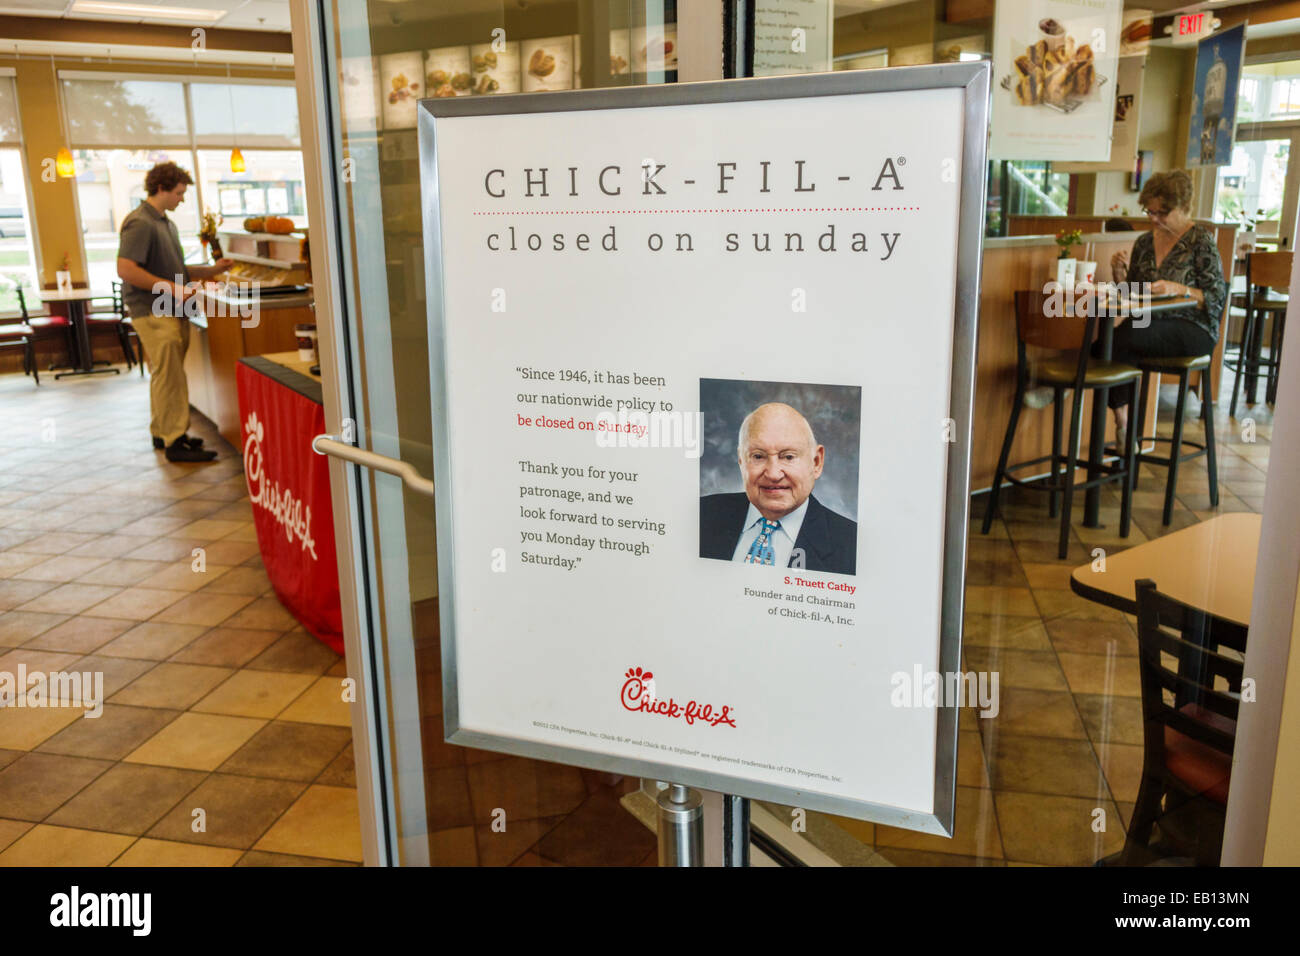 Florida,Palm Bay,Chick-fil-A,restaurant restaurants food dining cafe cafes,fast food,interior inside,entrance,sign,closed Sunday,policy,S. Truett Cath Stock Photo